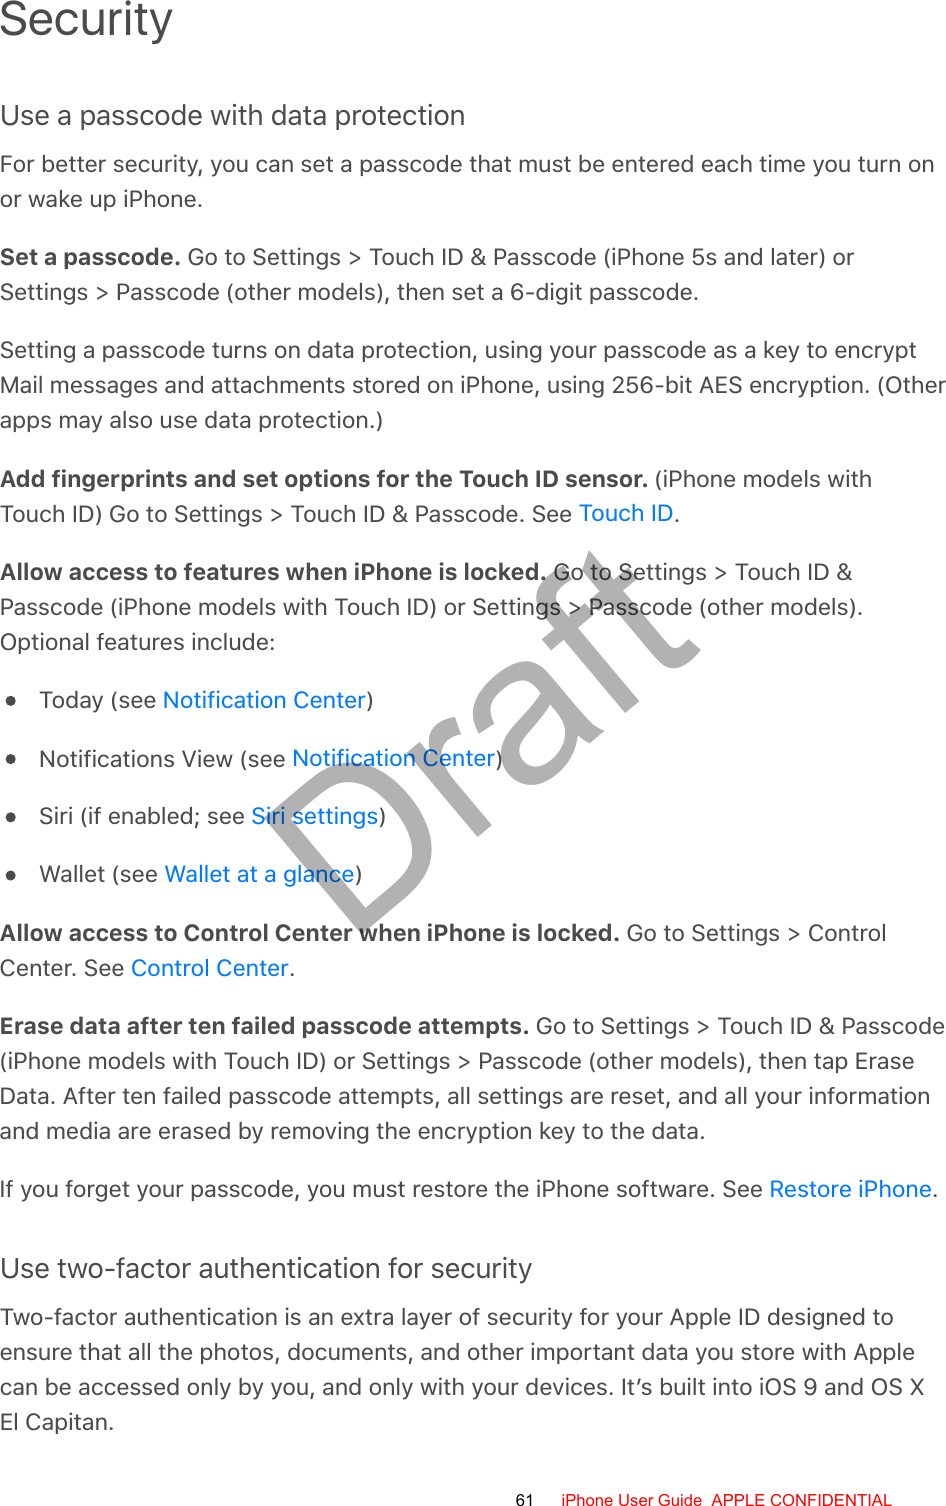 SecurityUse a passcode with data protectionFor better security, you can set a passcode that must be entered each time you turn onor wake up iPhone.Set a passcode. Go to Settings &gt; Touch ID &amp; Passcode (iPhone 5s and later) orSettings &gt; Passcode (other models), then set a 6-digit passcode.Setting a passcode turns on data protection, using your passcode as a key to encryptMail messages and attachments stored on iPhone, using 256-bit AES encryption. (Otherapps may also use data protection.)Add fingerprints and set options for the Touch ID sensor. (iPhone models withTouch ID) Go to Settings &gt; Touch ID &amp; Passcode. See  .Allow access to features when iPhone is locked. Go to Settings &gt; Touch ID &amp;Passcode (iPhone models with Touch ID) or Settings &gt; Passcode (other models).Optional features include:Today (see  )Notifications View (see  )Siri (if enabled; see  )Wallet (see  )Allow access to Control Center when iPhone is locked. Go to Settings &gt; ControlCenter. See  .Erase data after ten failed passcode attempts. Go to Settings &gt; Touch ID &amp; Passcode(iPhone models with Touch ID) or Settings &gt; Passcode (other models), then tap EraseData. After ten failed passcode attempts, all settings are reset, and all your informationand media are erased by removing the encryption key to the data.If you forget your passcode, you must restore the iPhone software. See  .Use two-factor authentication for securityTwo-factor authentication is an extra layer of security for your Apple ID designed toensure that all the photos, documents, and other important data you store with Applecan be accessed only by you, and only with your devices. It’s built into iOS 9 and OS XEl Capitan.Touch IDNotification CenterNotification CenterSiri settingsWallet at a glanceControl CenterRestore iPhone61 iPhone User Guide  APPLE CONFIDENTIALDraft